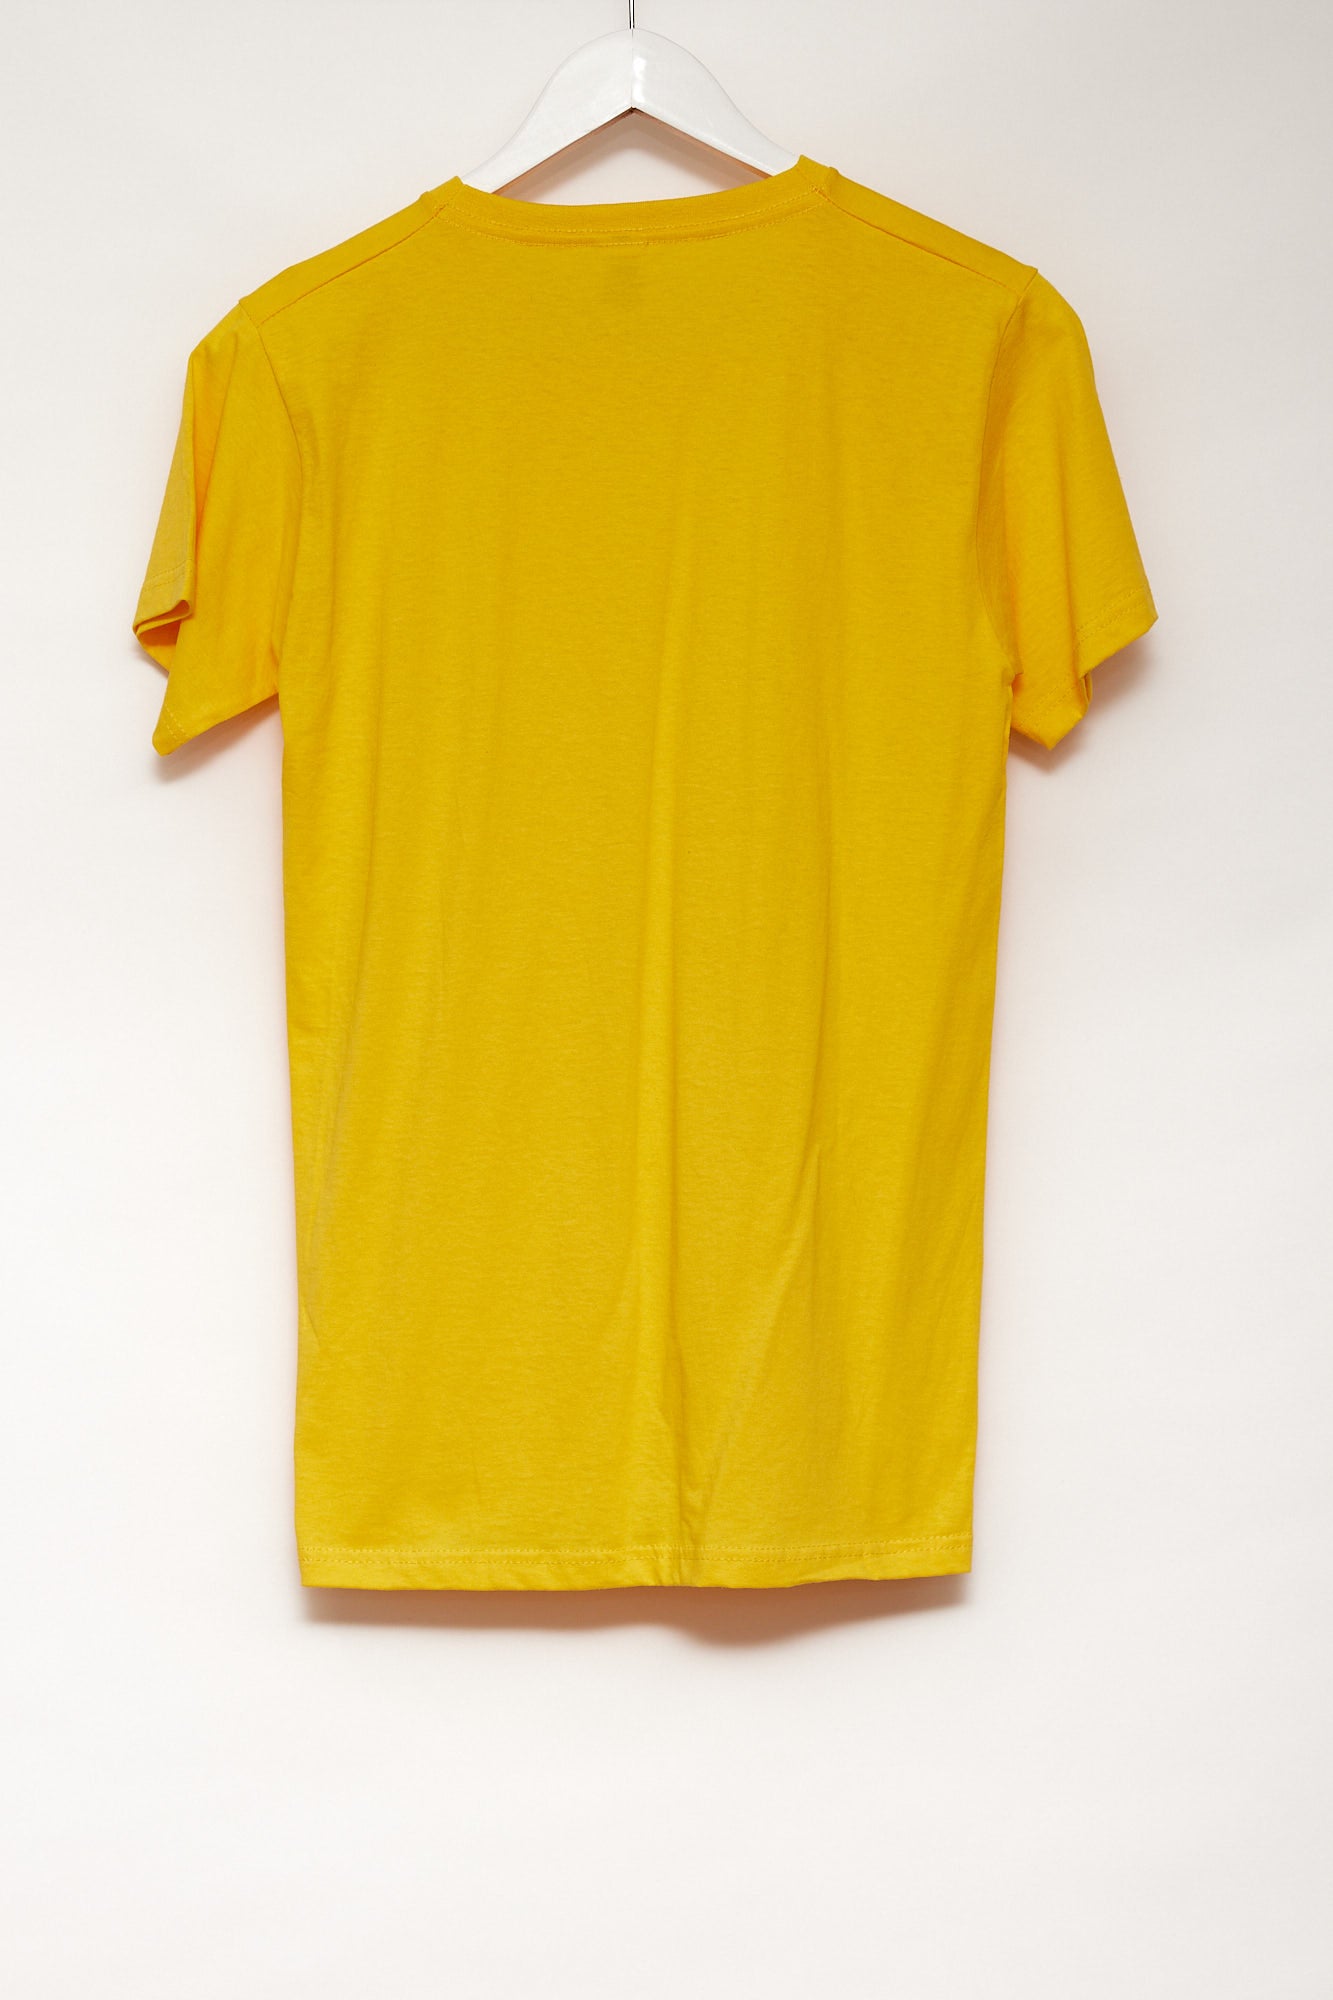 Mens Fruit of the Loom Yellow V-neck T-shirt: Size Small